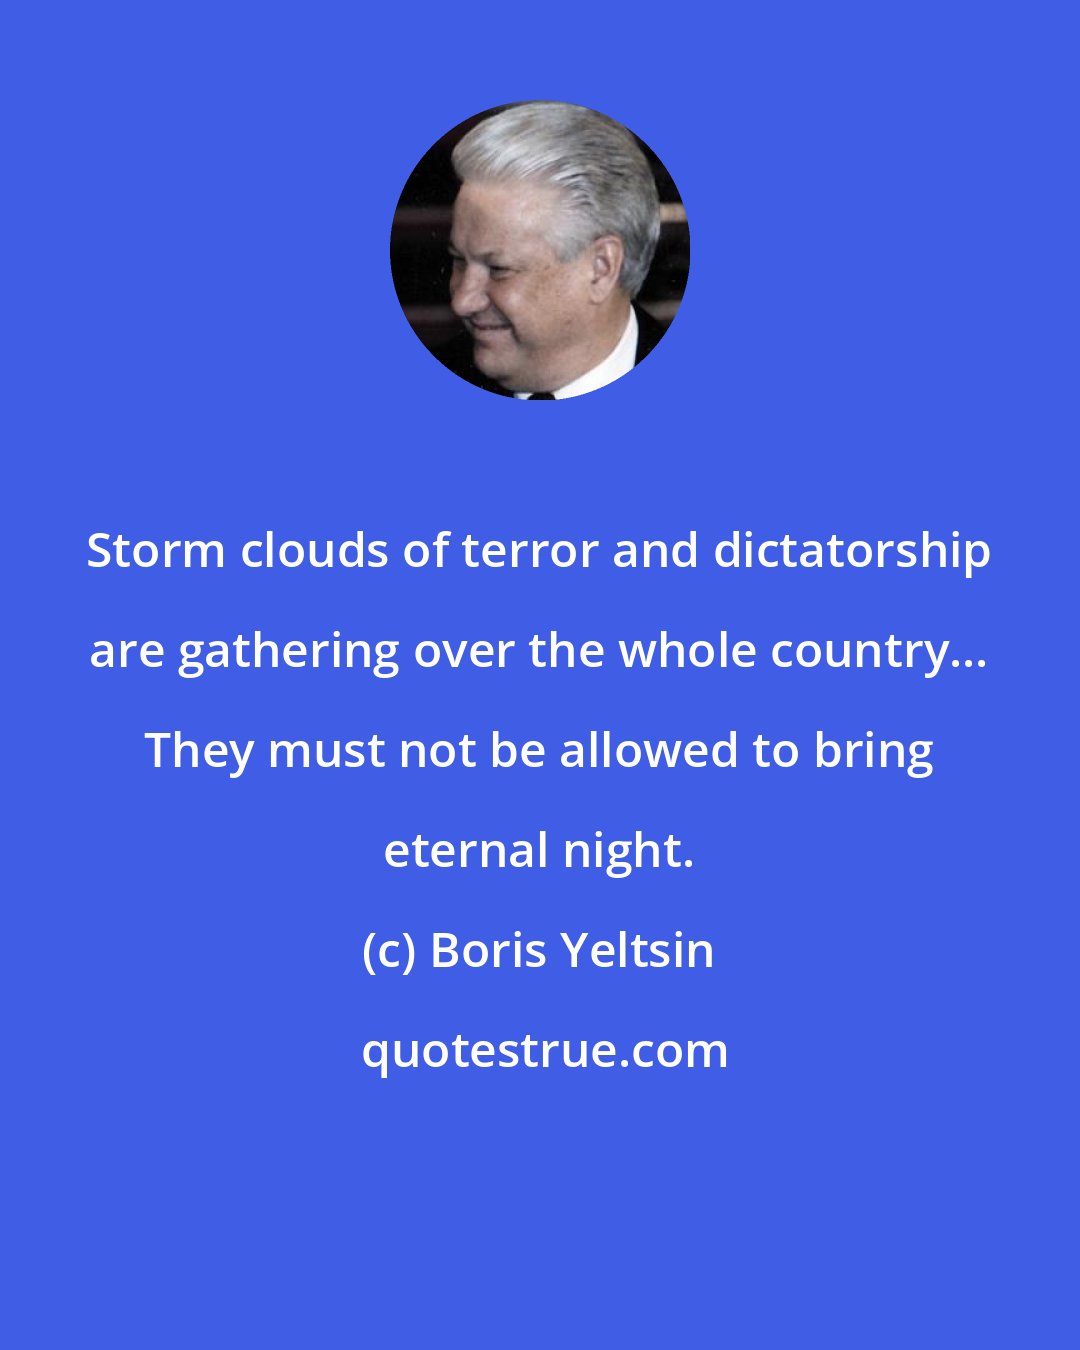 Boris Yeltsin: Storm clouds of terror and dictatorship are gathering over the whole country... They must not be allowed to bring eternal night.